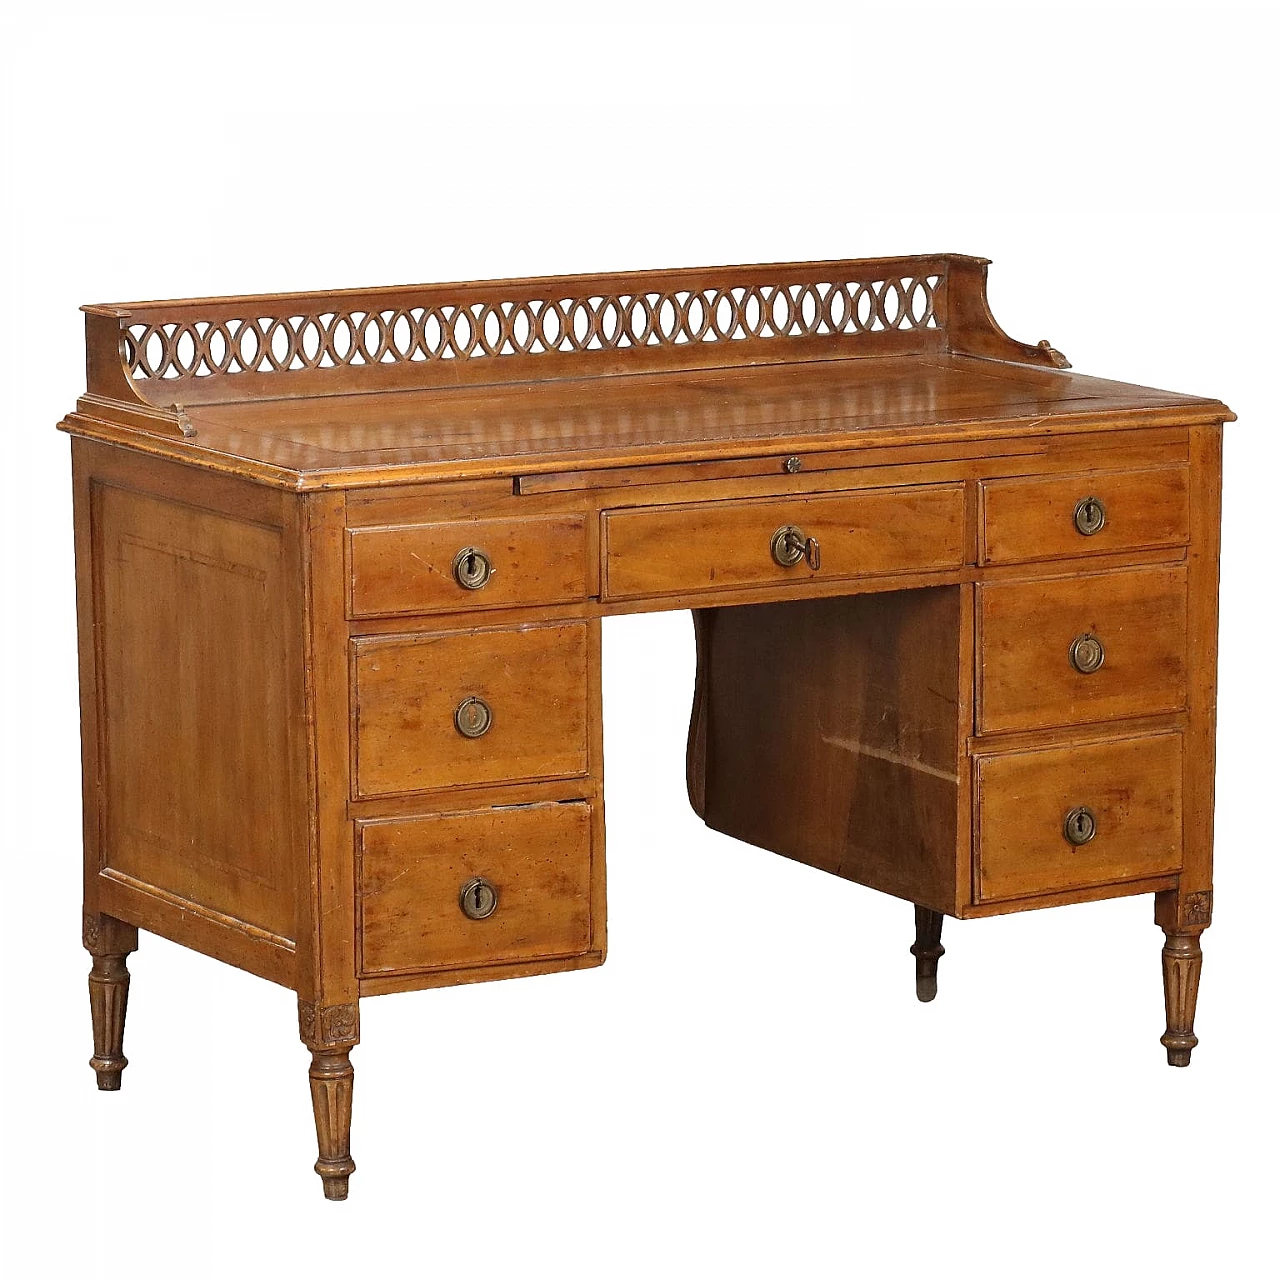 Walnut and fir desk with truncated cone legs, 19th century 1